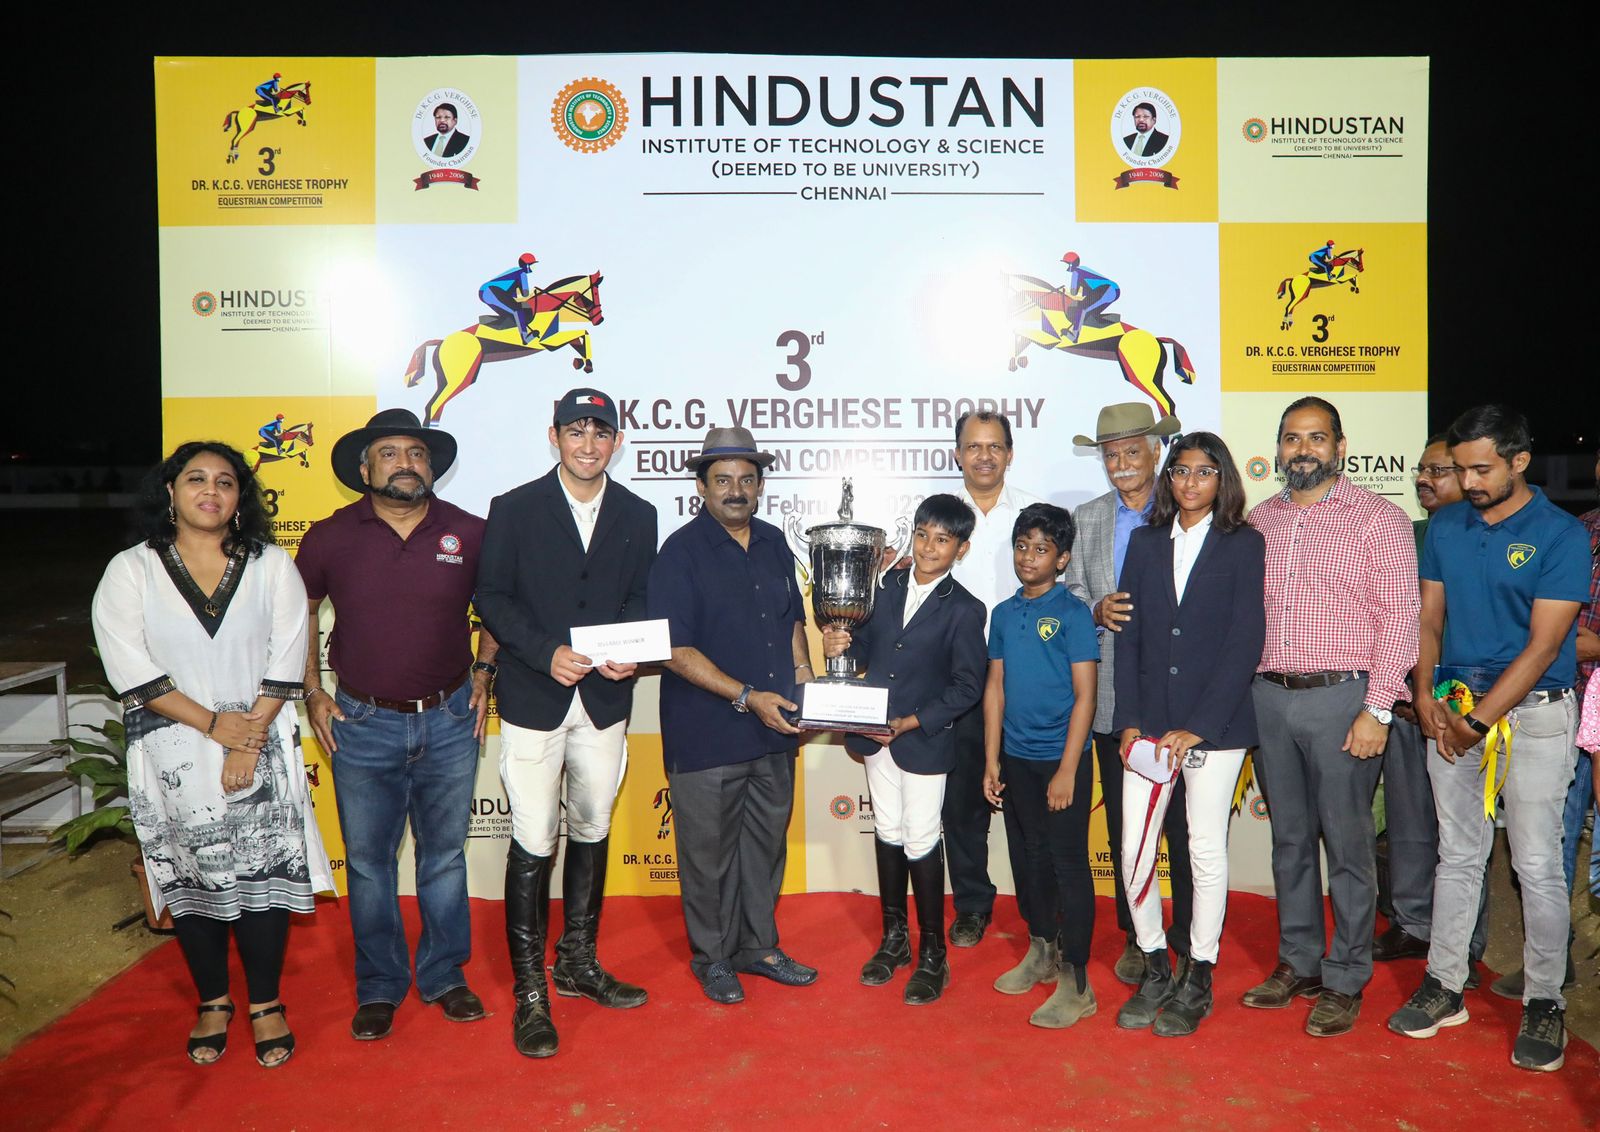 Dr. KCG Verghese Rolling Trophy presented to Chennai Equitation Centre by Dr. Anand Jacob Verghese, Chancellor, HITS